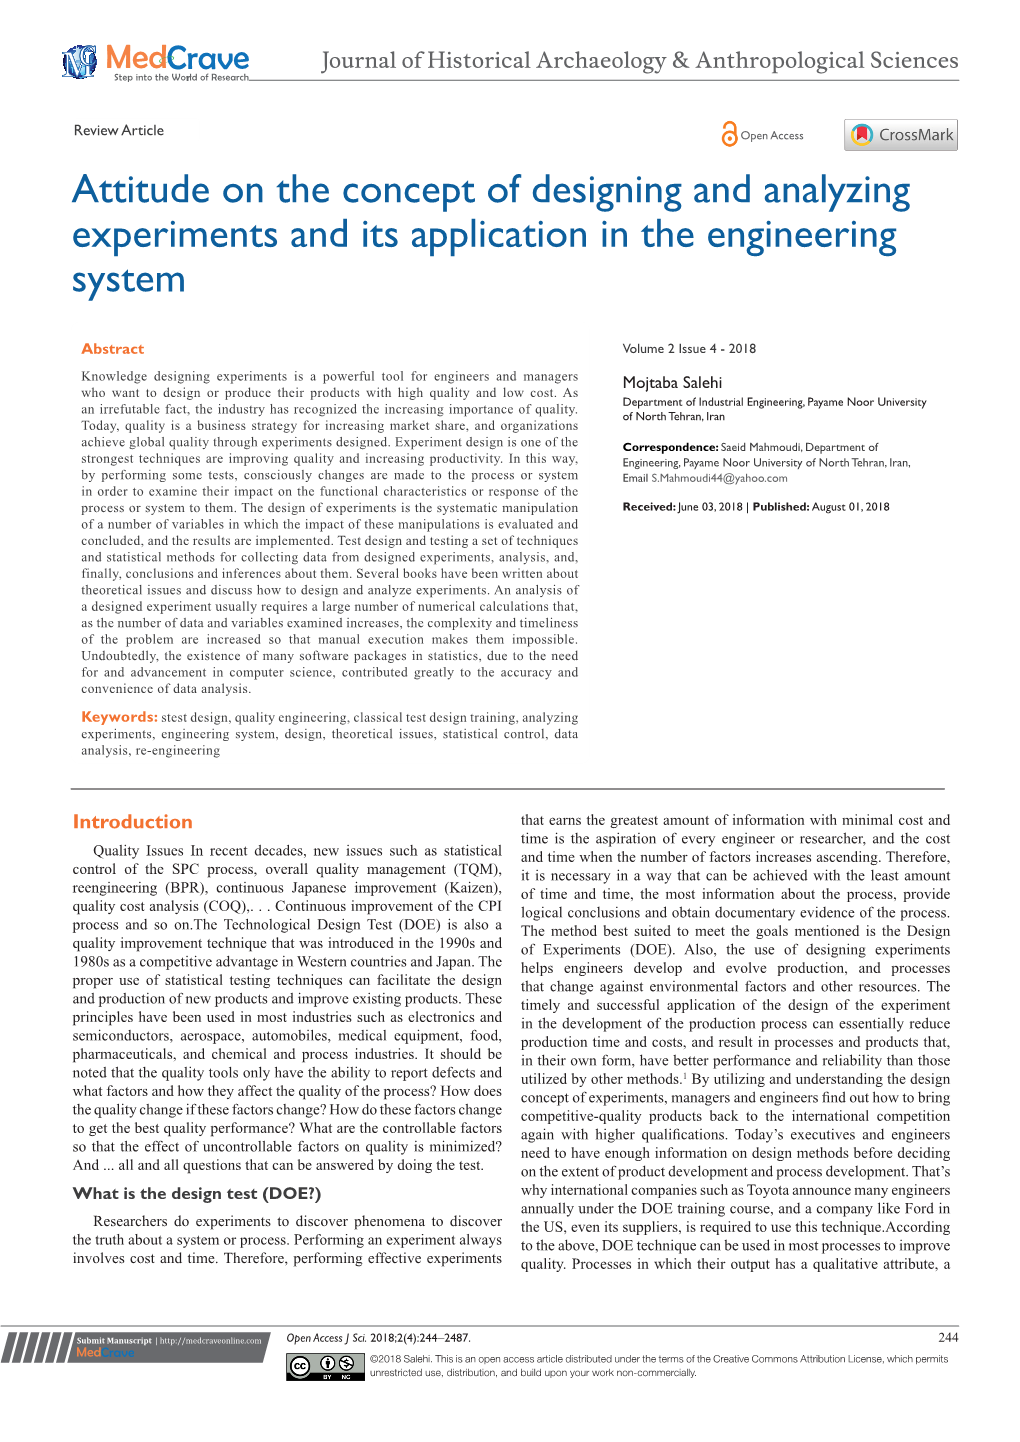 Attitude on the Concept of Designing and Analyzing Experiments and Its Application in the Engineering System